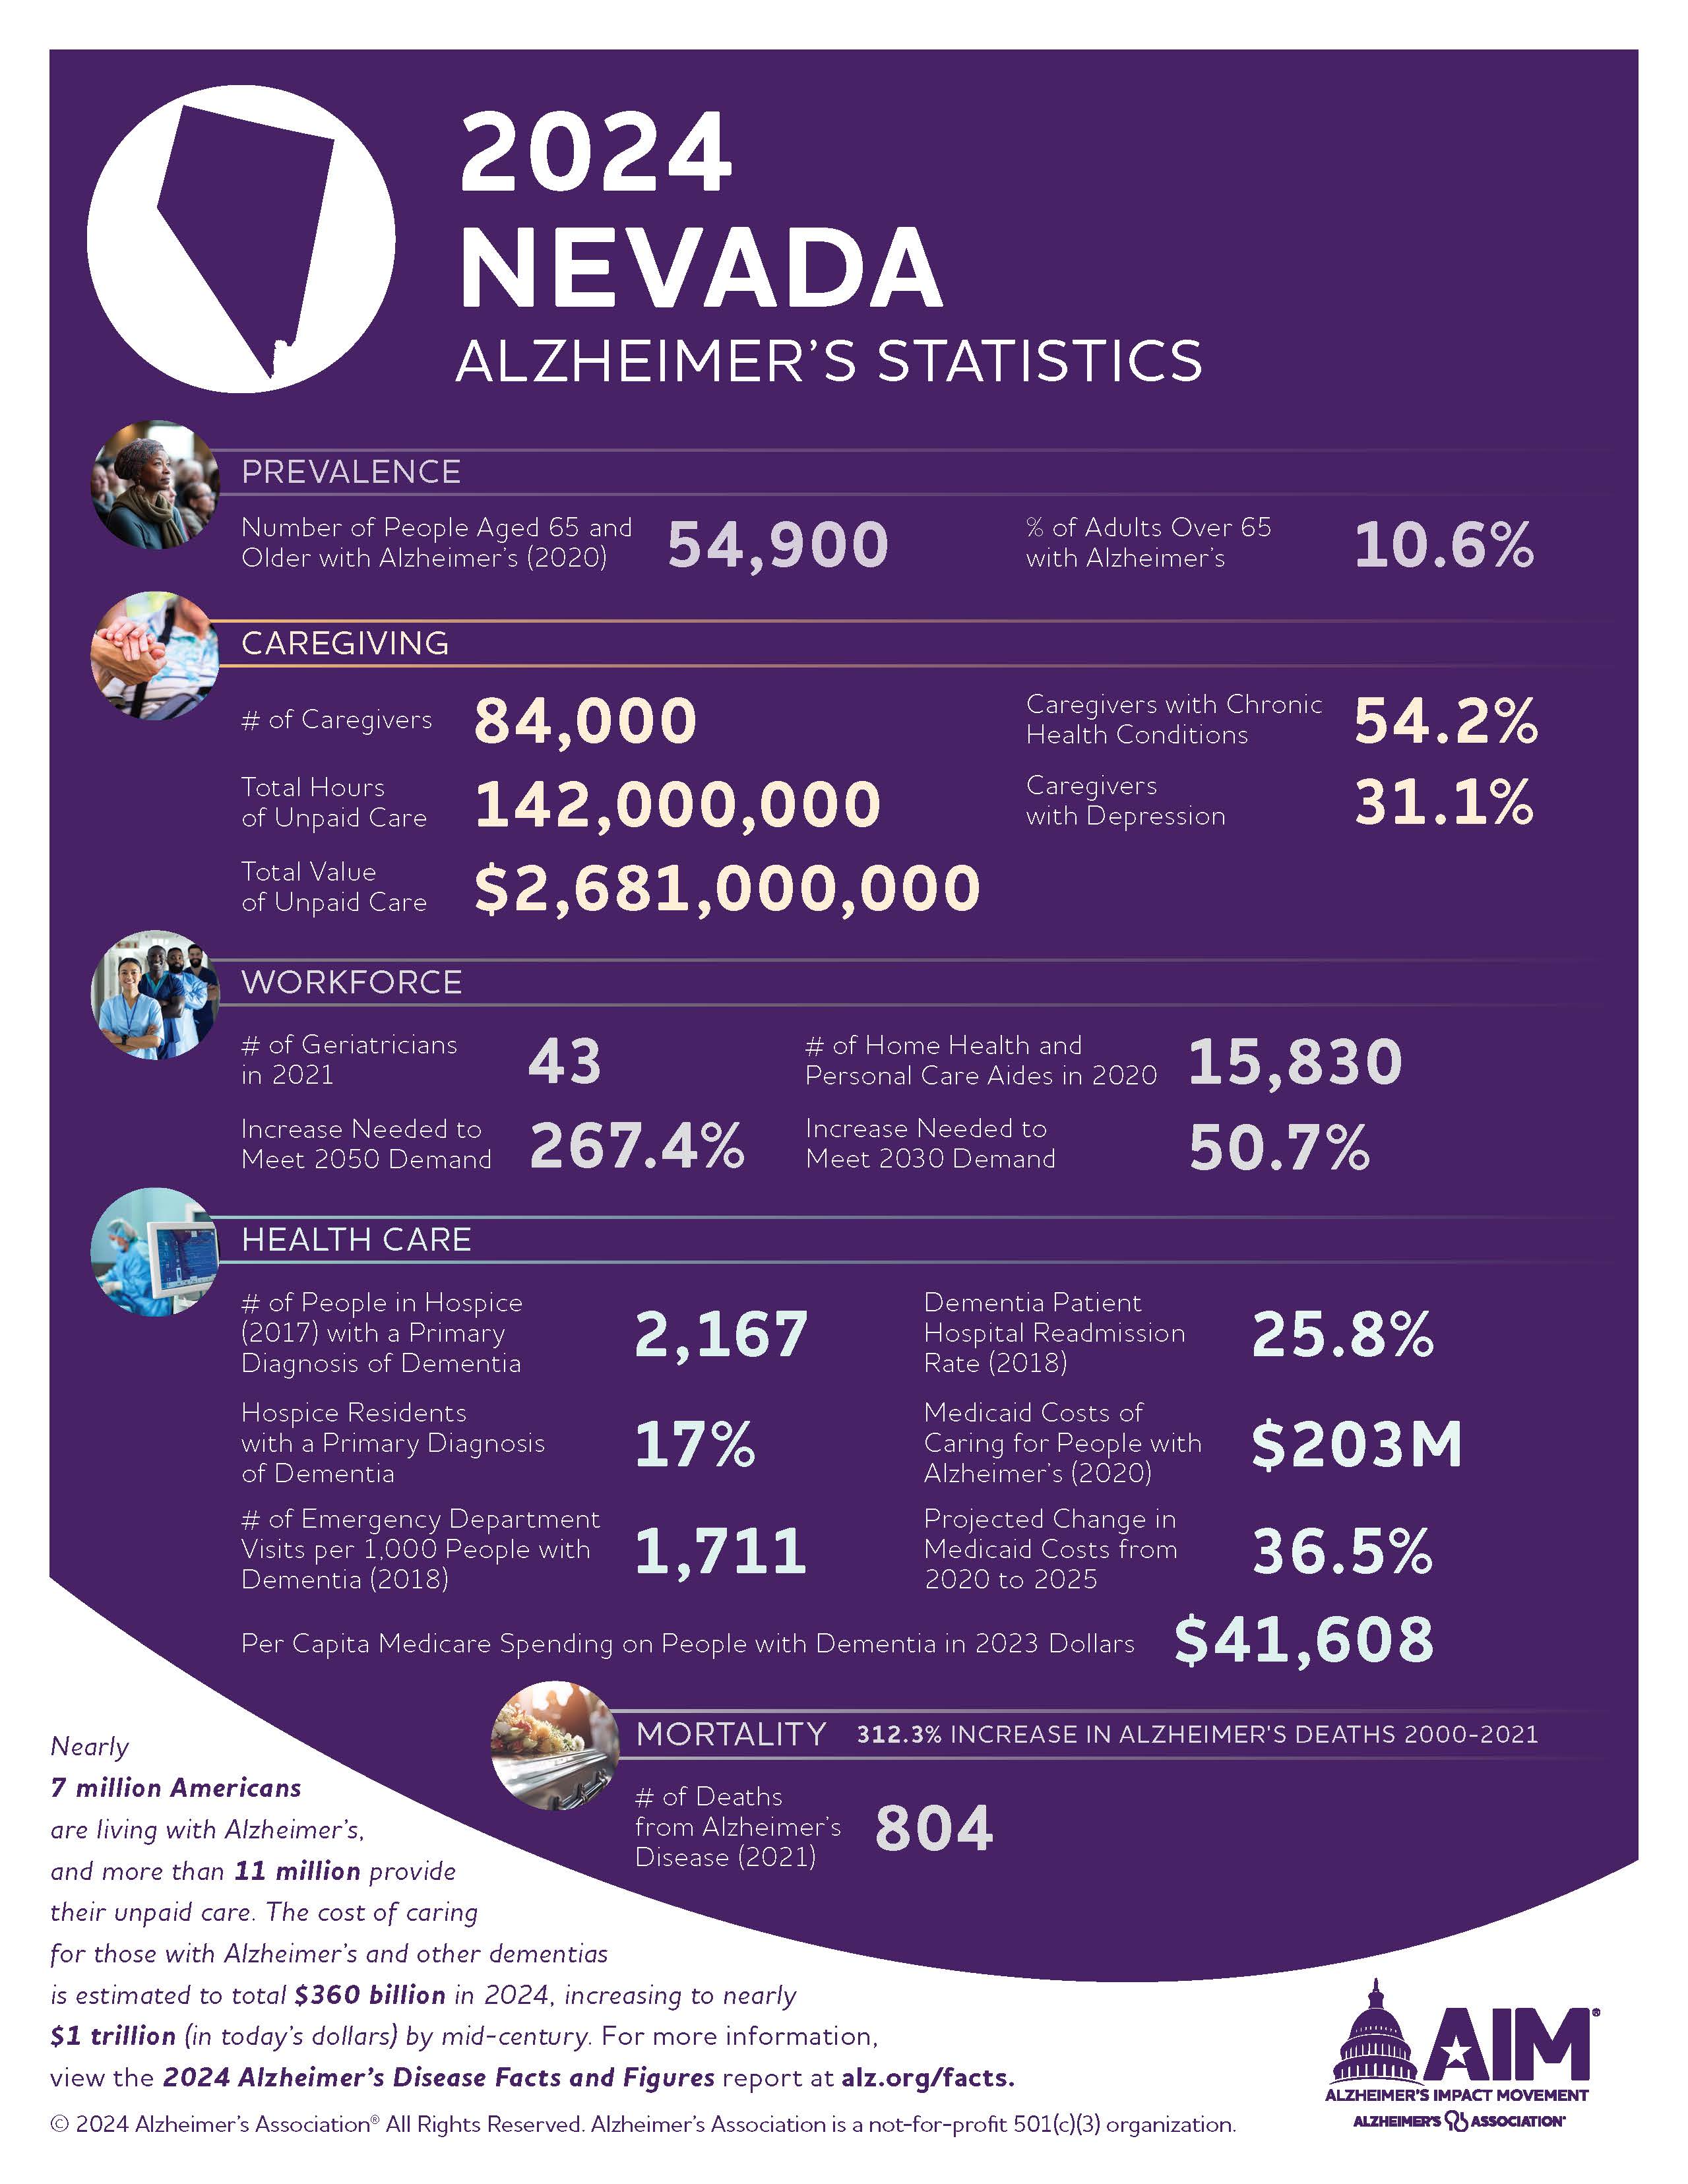 2024-Facts-and-Figures-Statesheets-Nevada.jpg